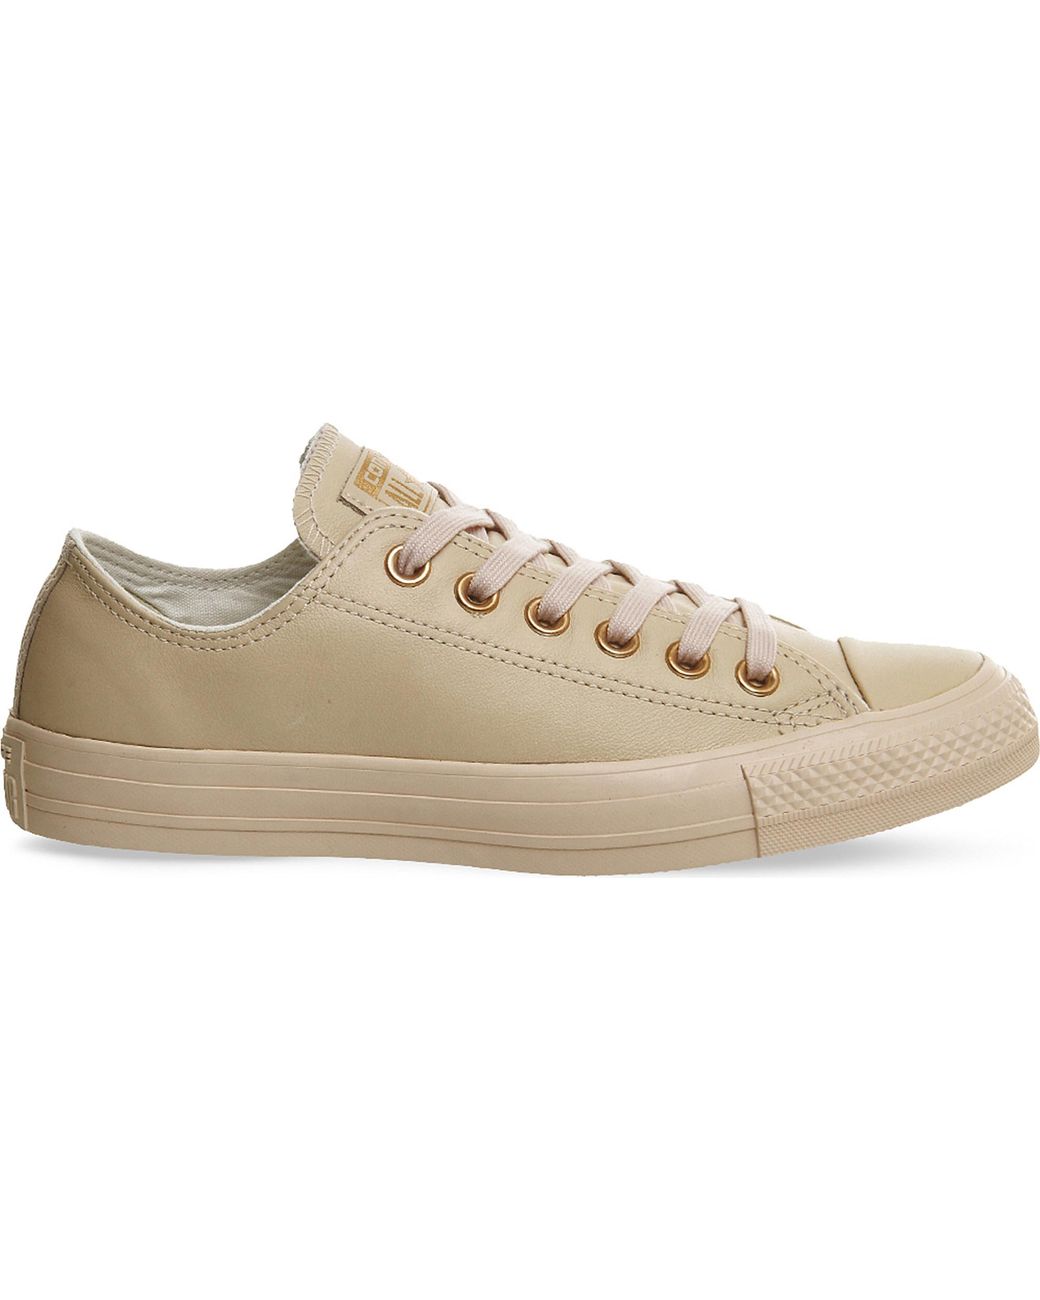 Converse All Star Low-top Leather Trainers in Rose Tan Rose Gold (Natural)  for Men | Lyst